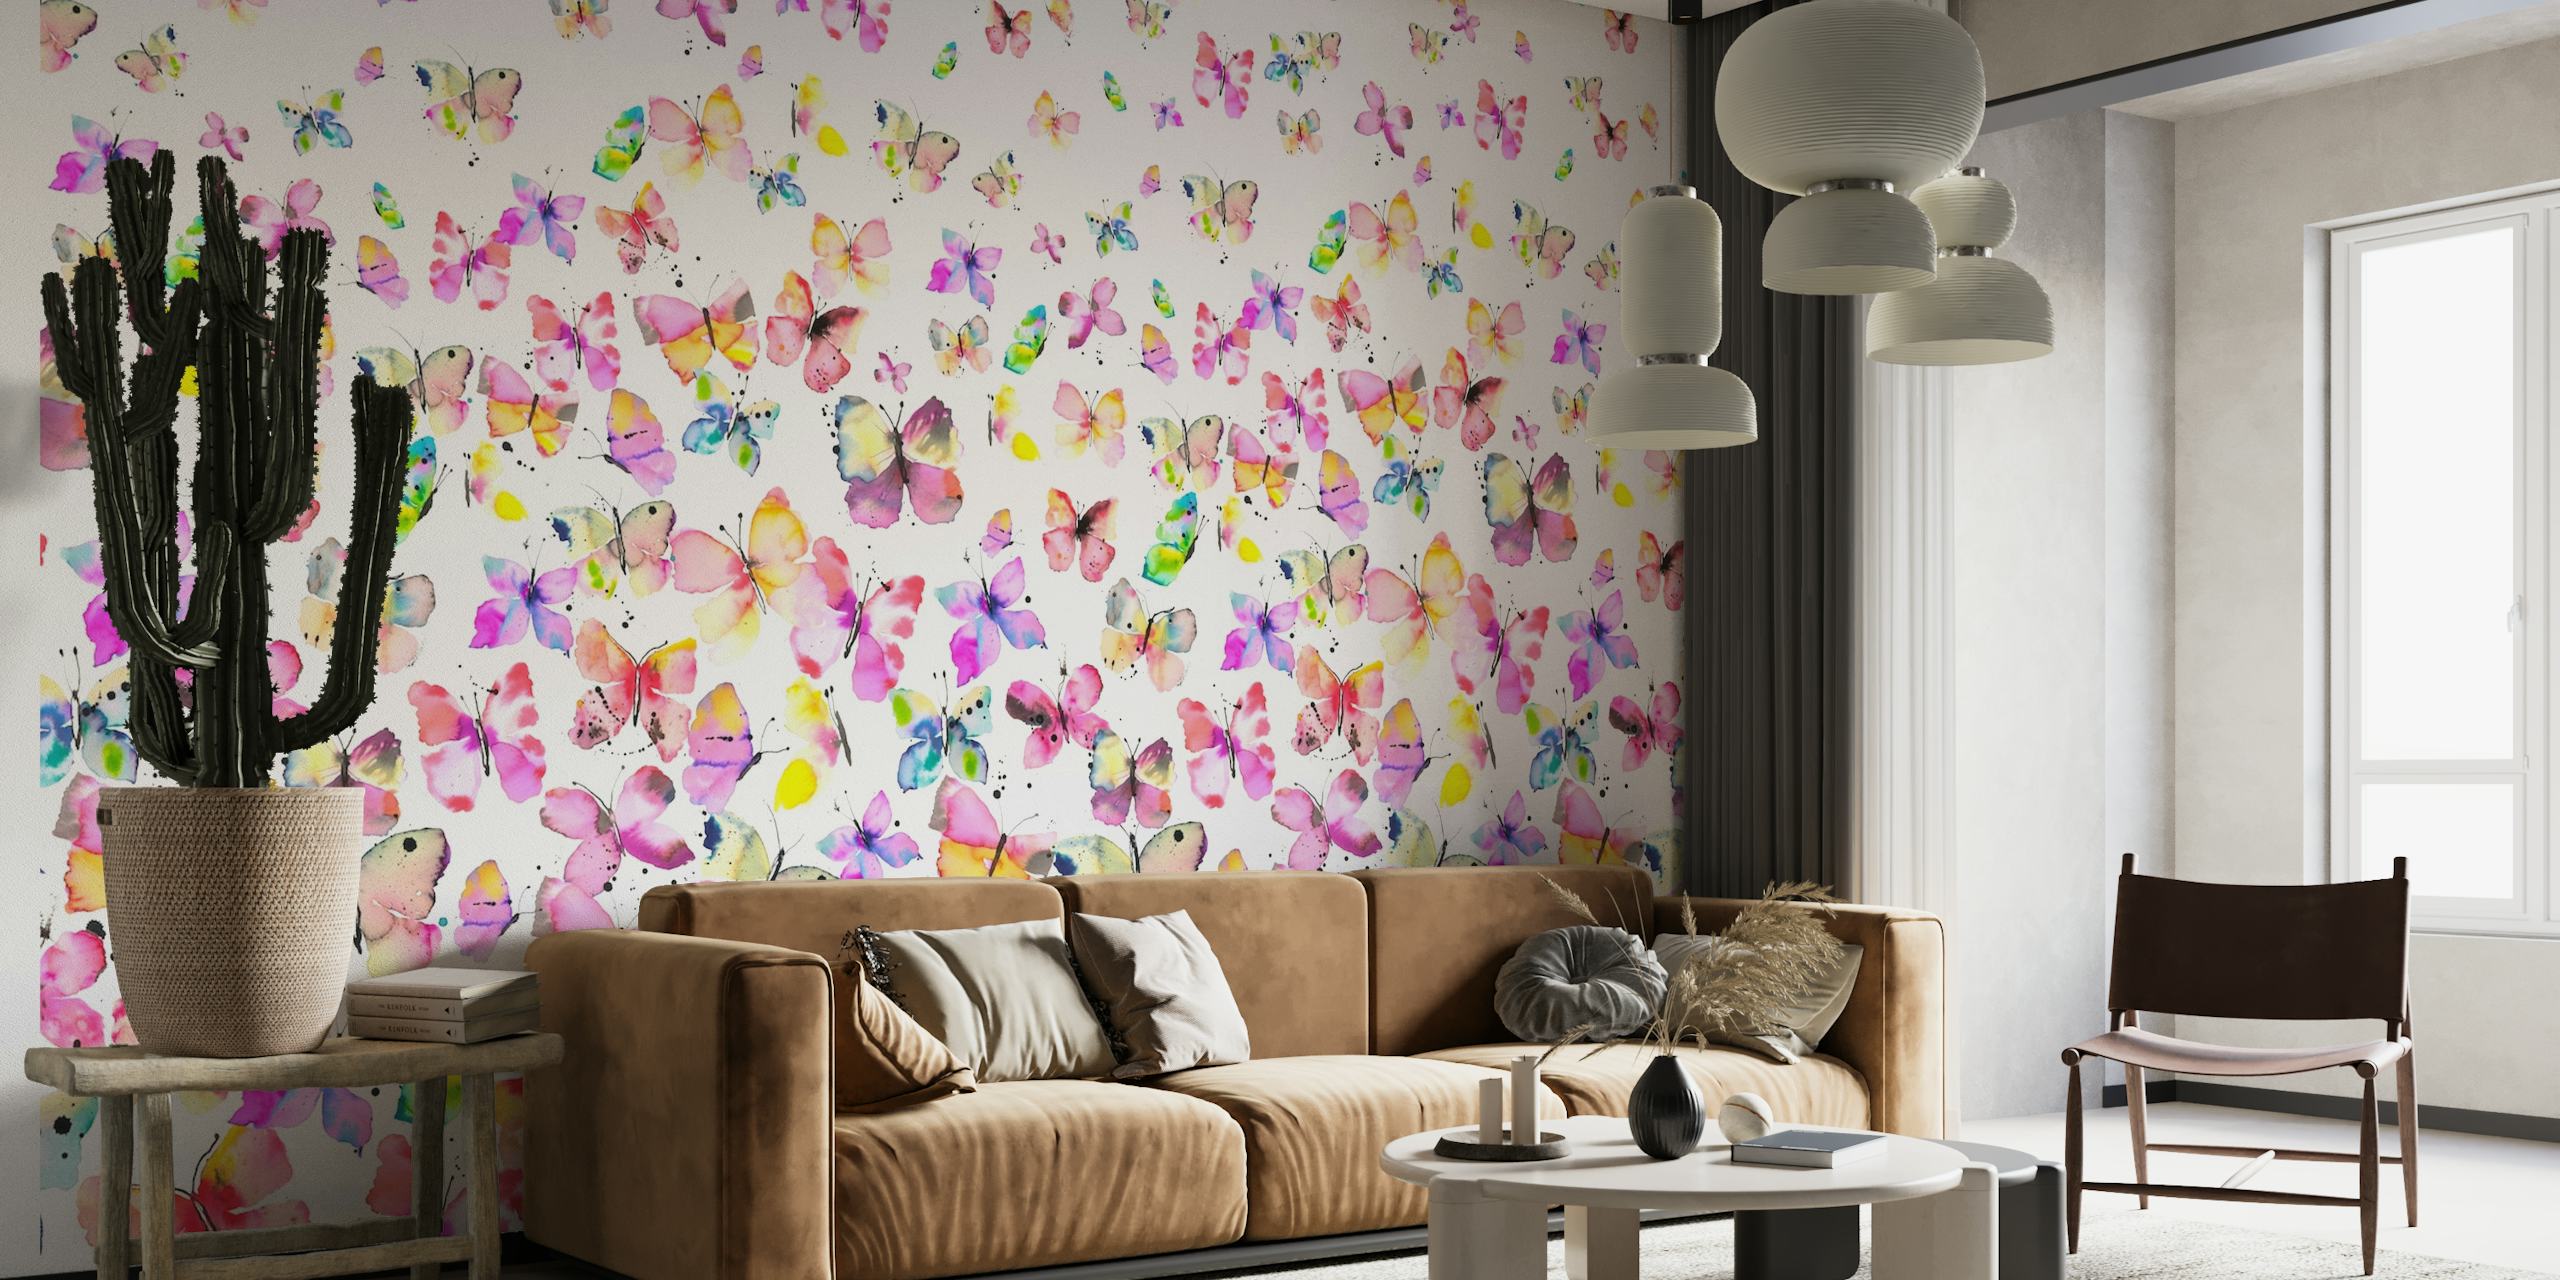 Colorful watercolor butterflies in a degrade pattern on a wall mural